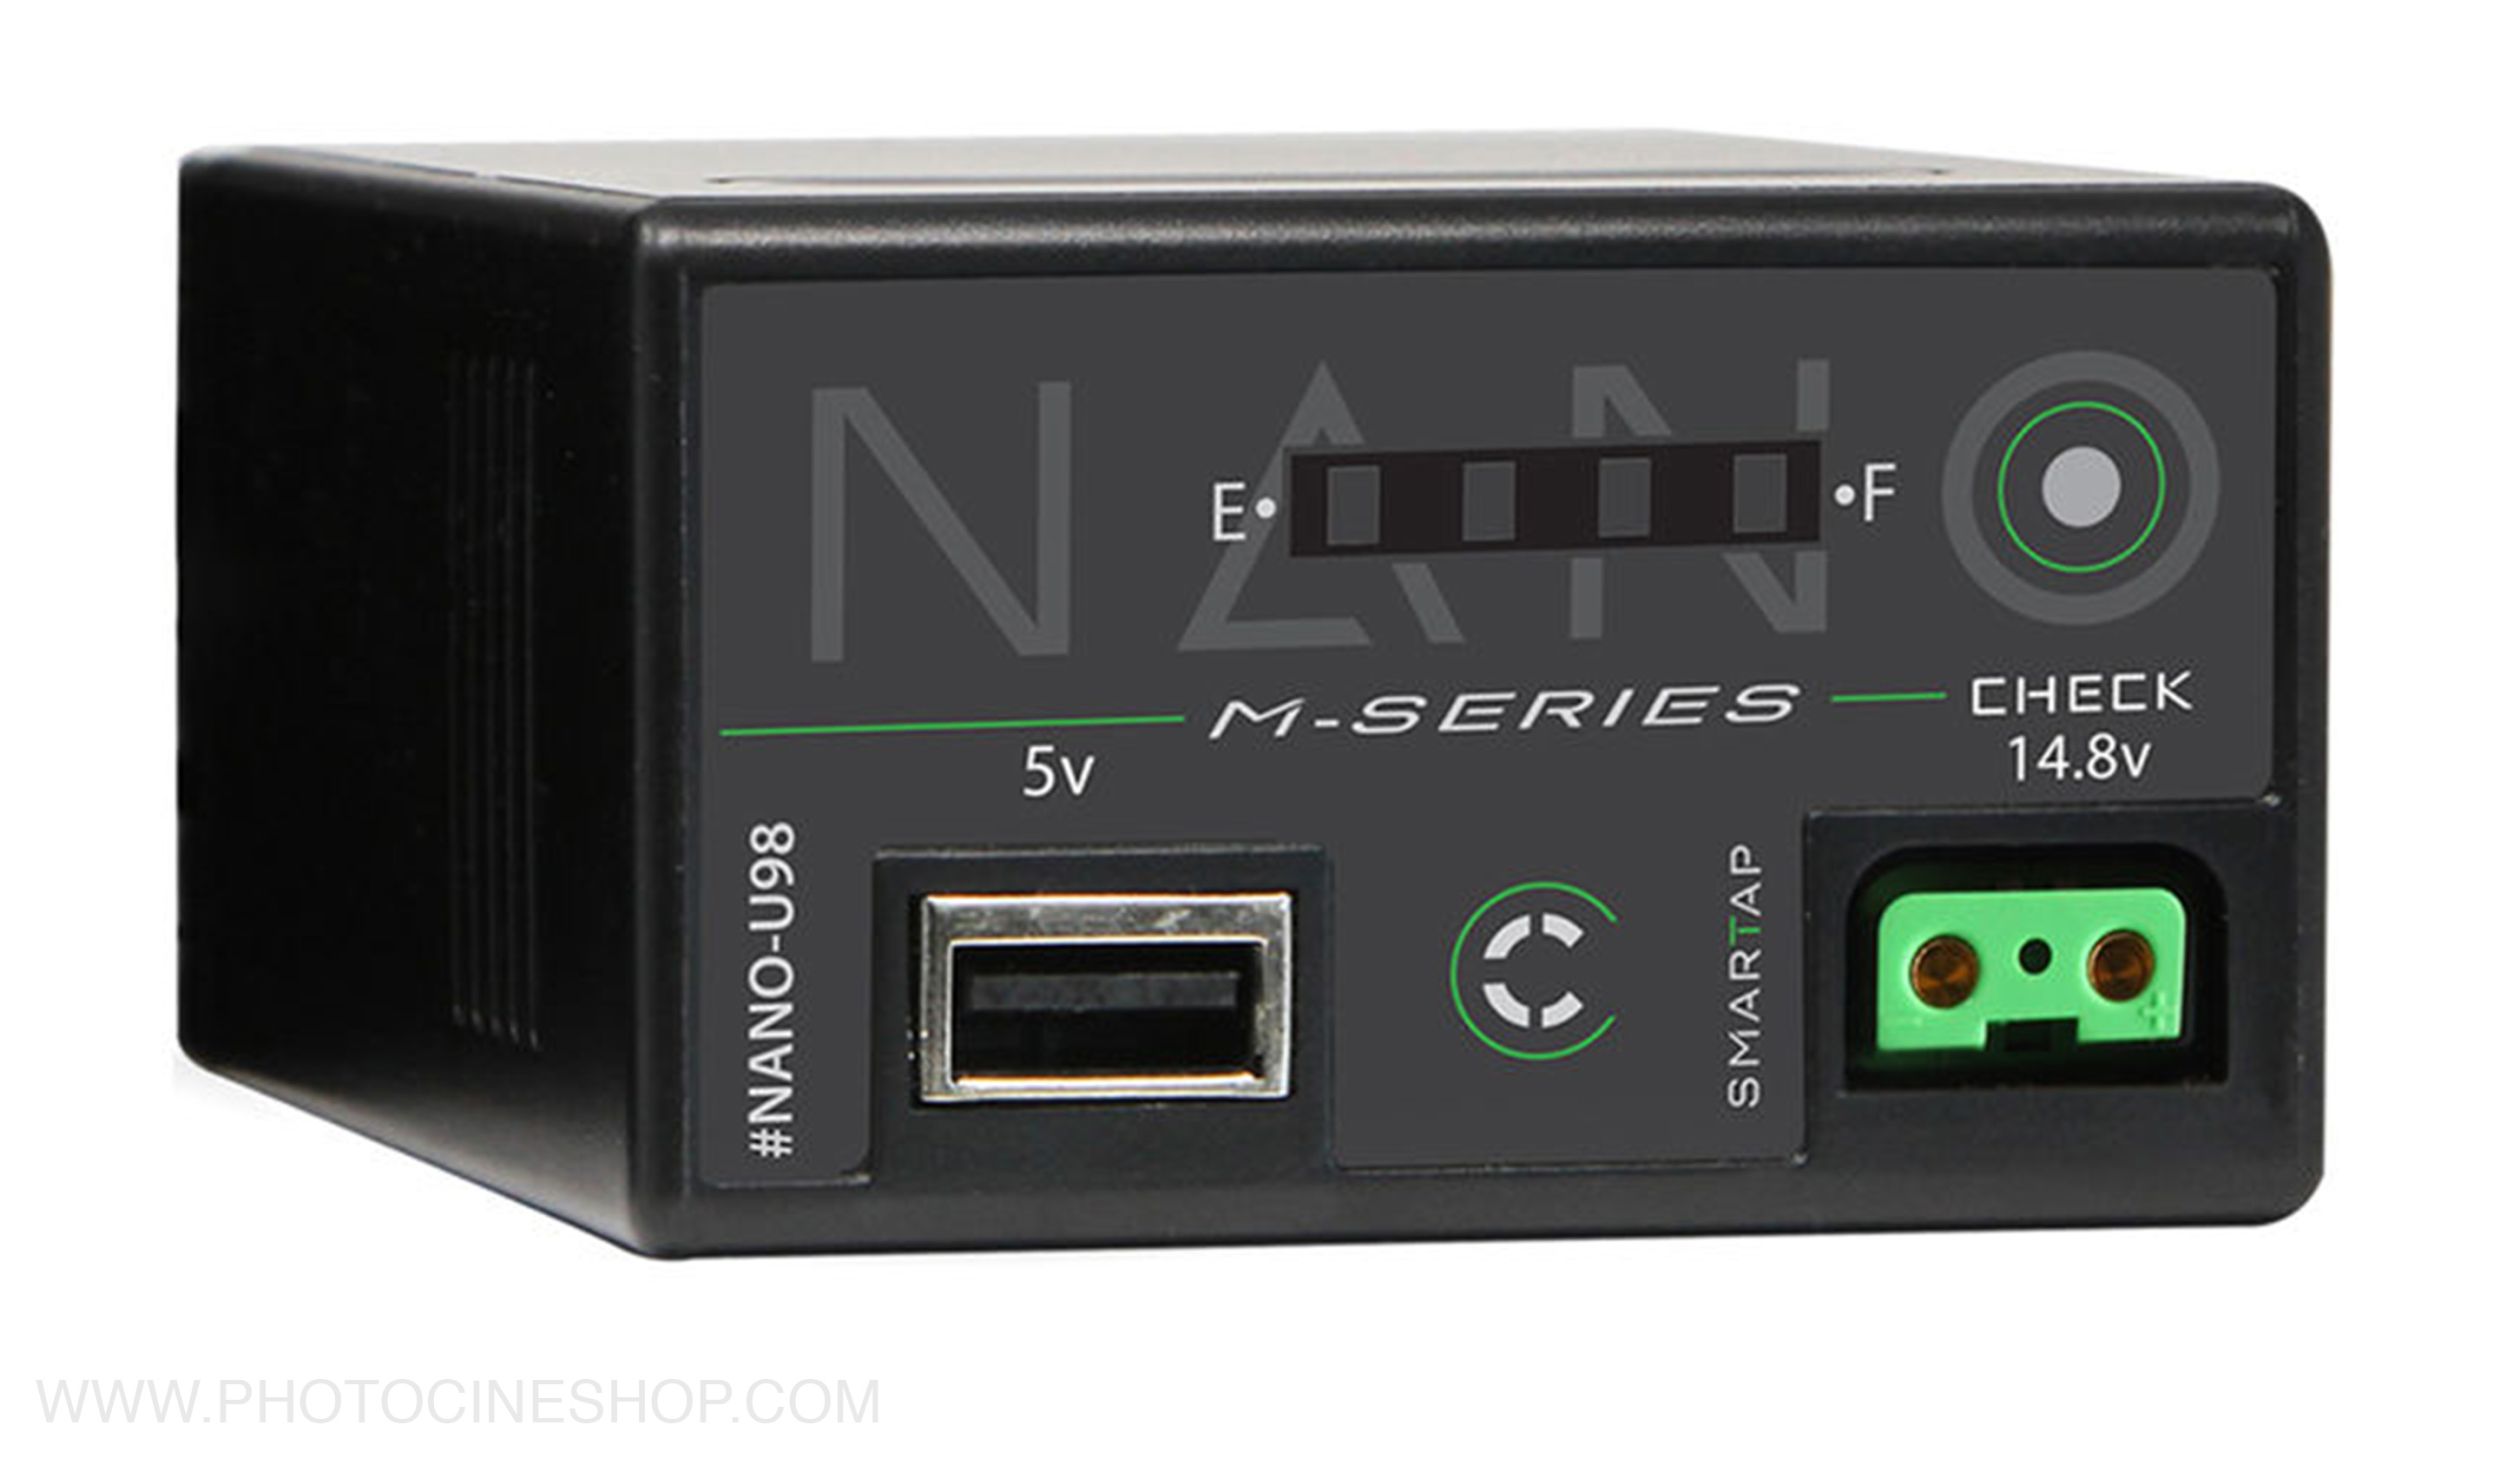 CORE SWX - NANO-U98 - CoreSWX 98wh 14.8v, 6600mah HDV Battery w/ 4 LED Gauge with PowerTap and USB for Select PMW/PXW Camcorders